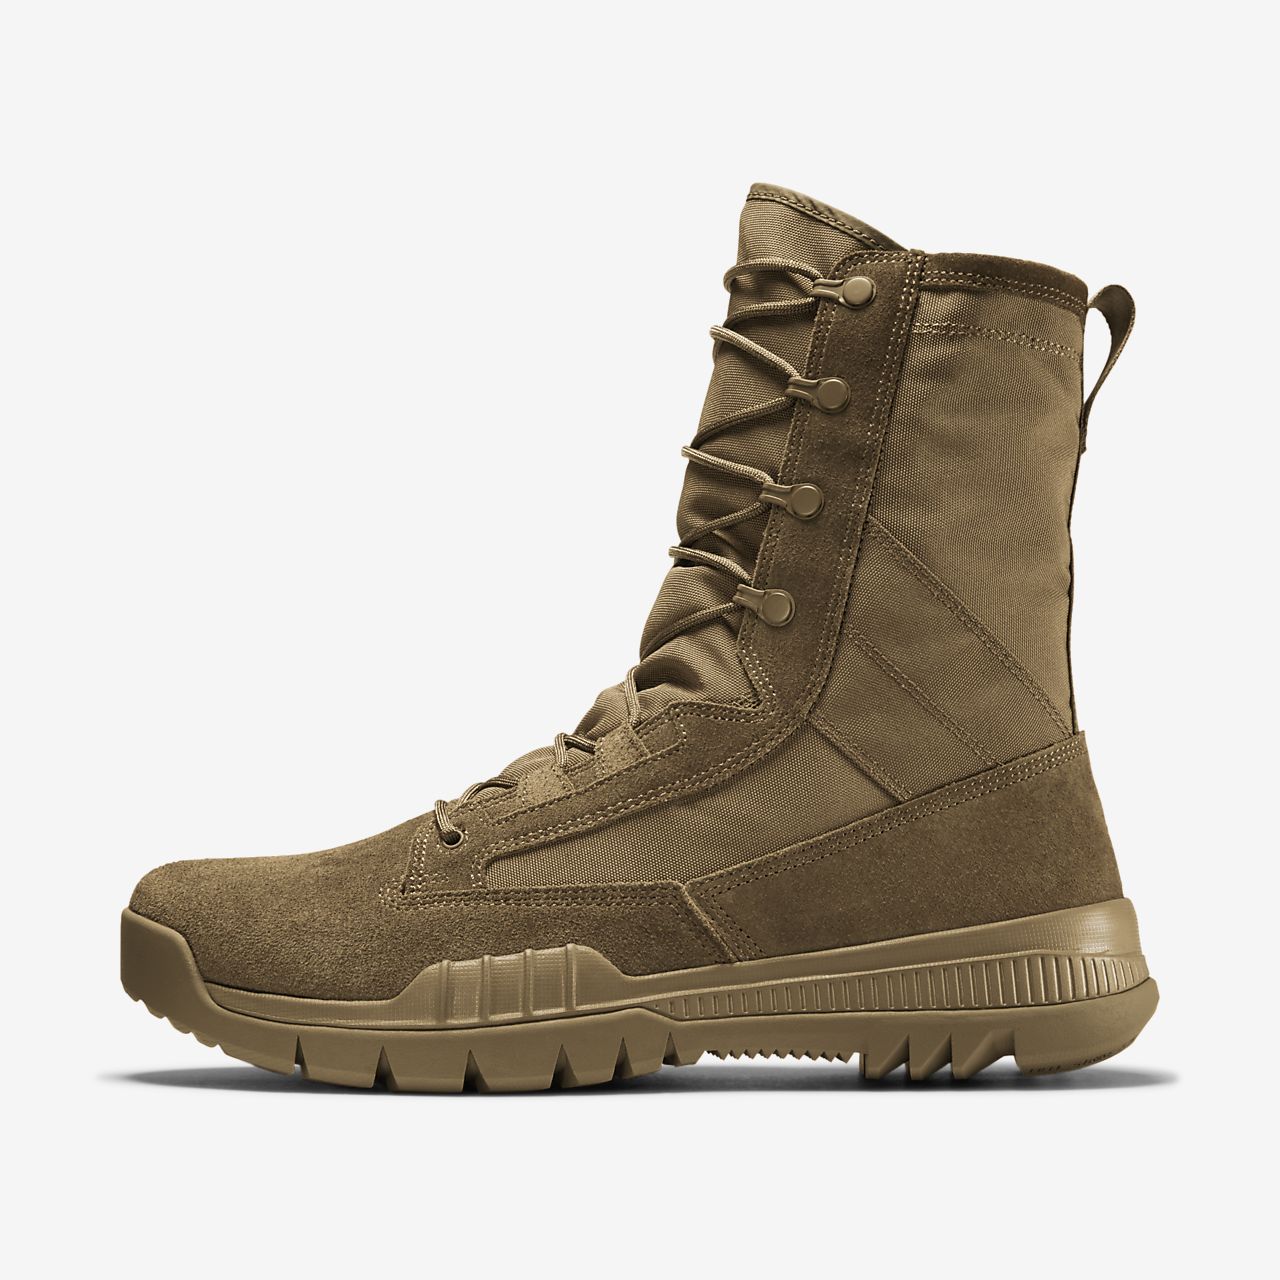 Nike Boots Army | Bruin Blog